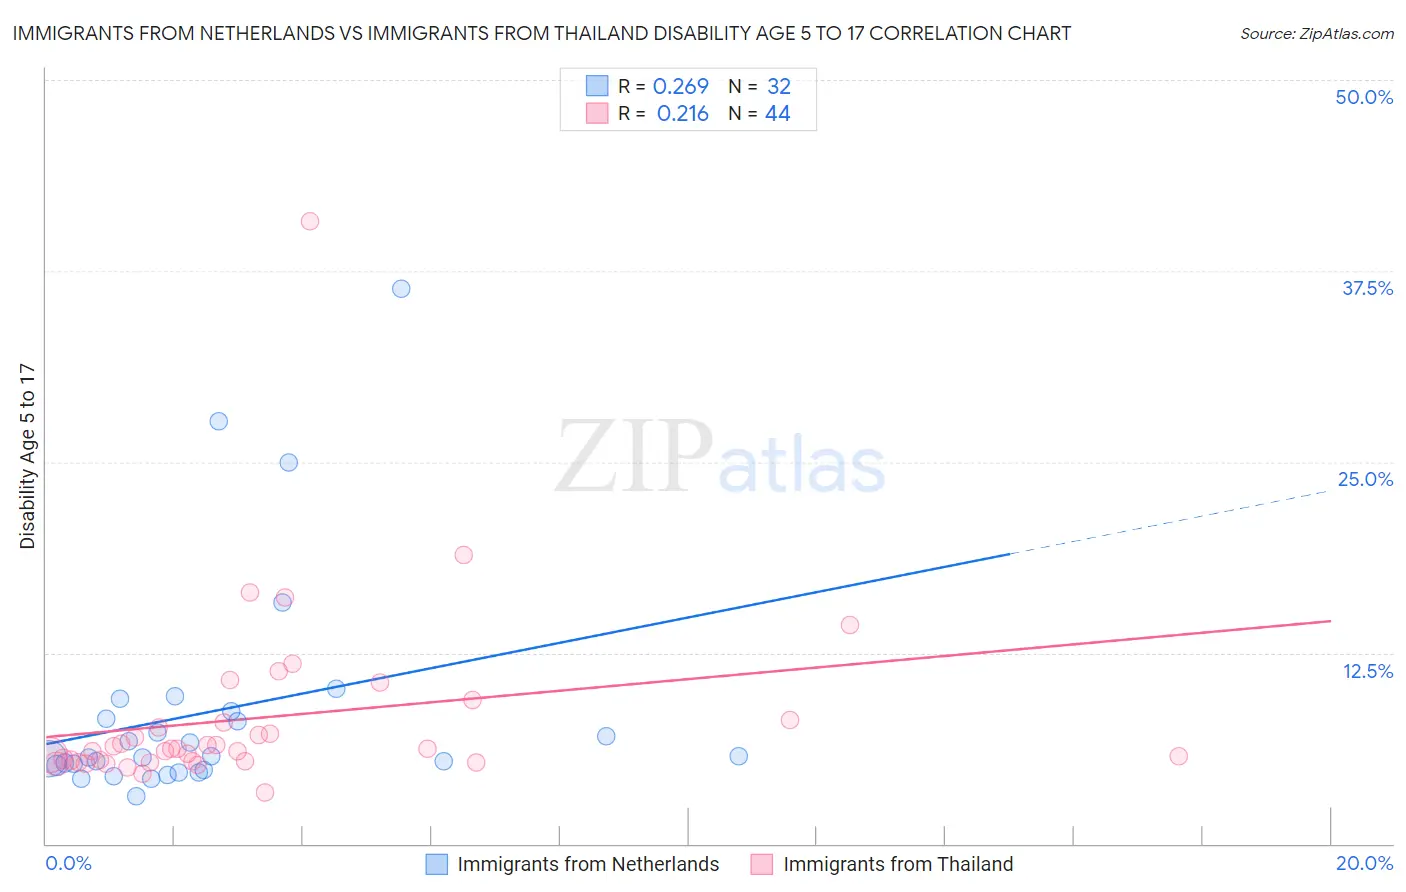 Immigrants from Netherlands vs Immigrants from Thailand Disability Age 5 to 17